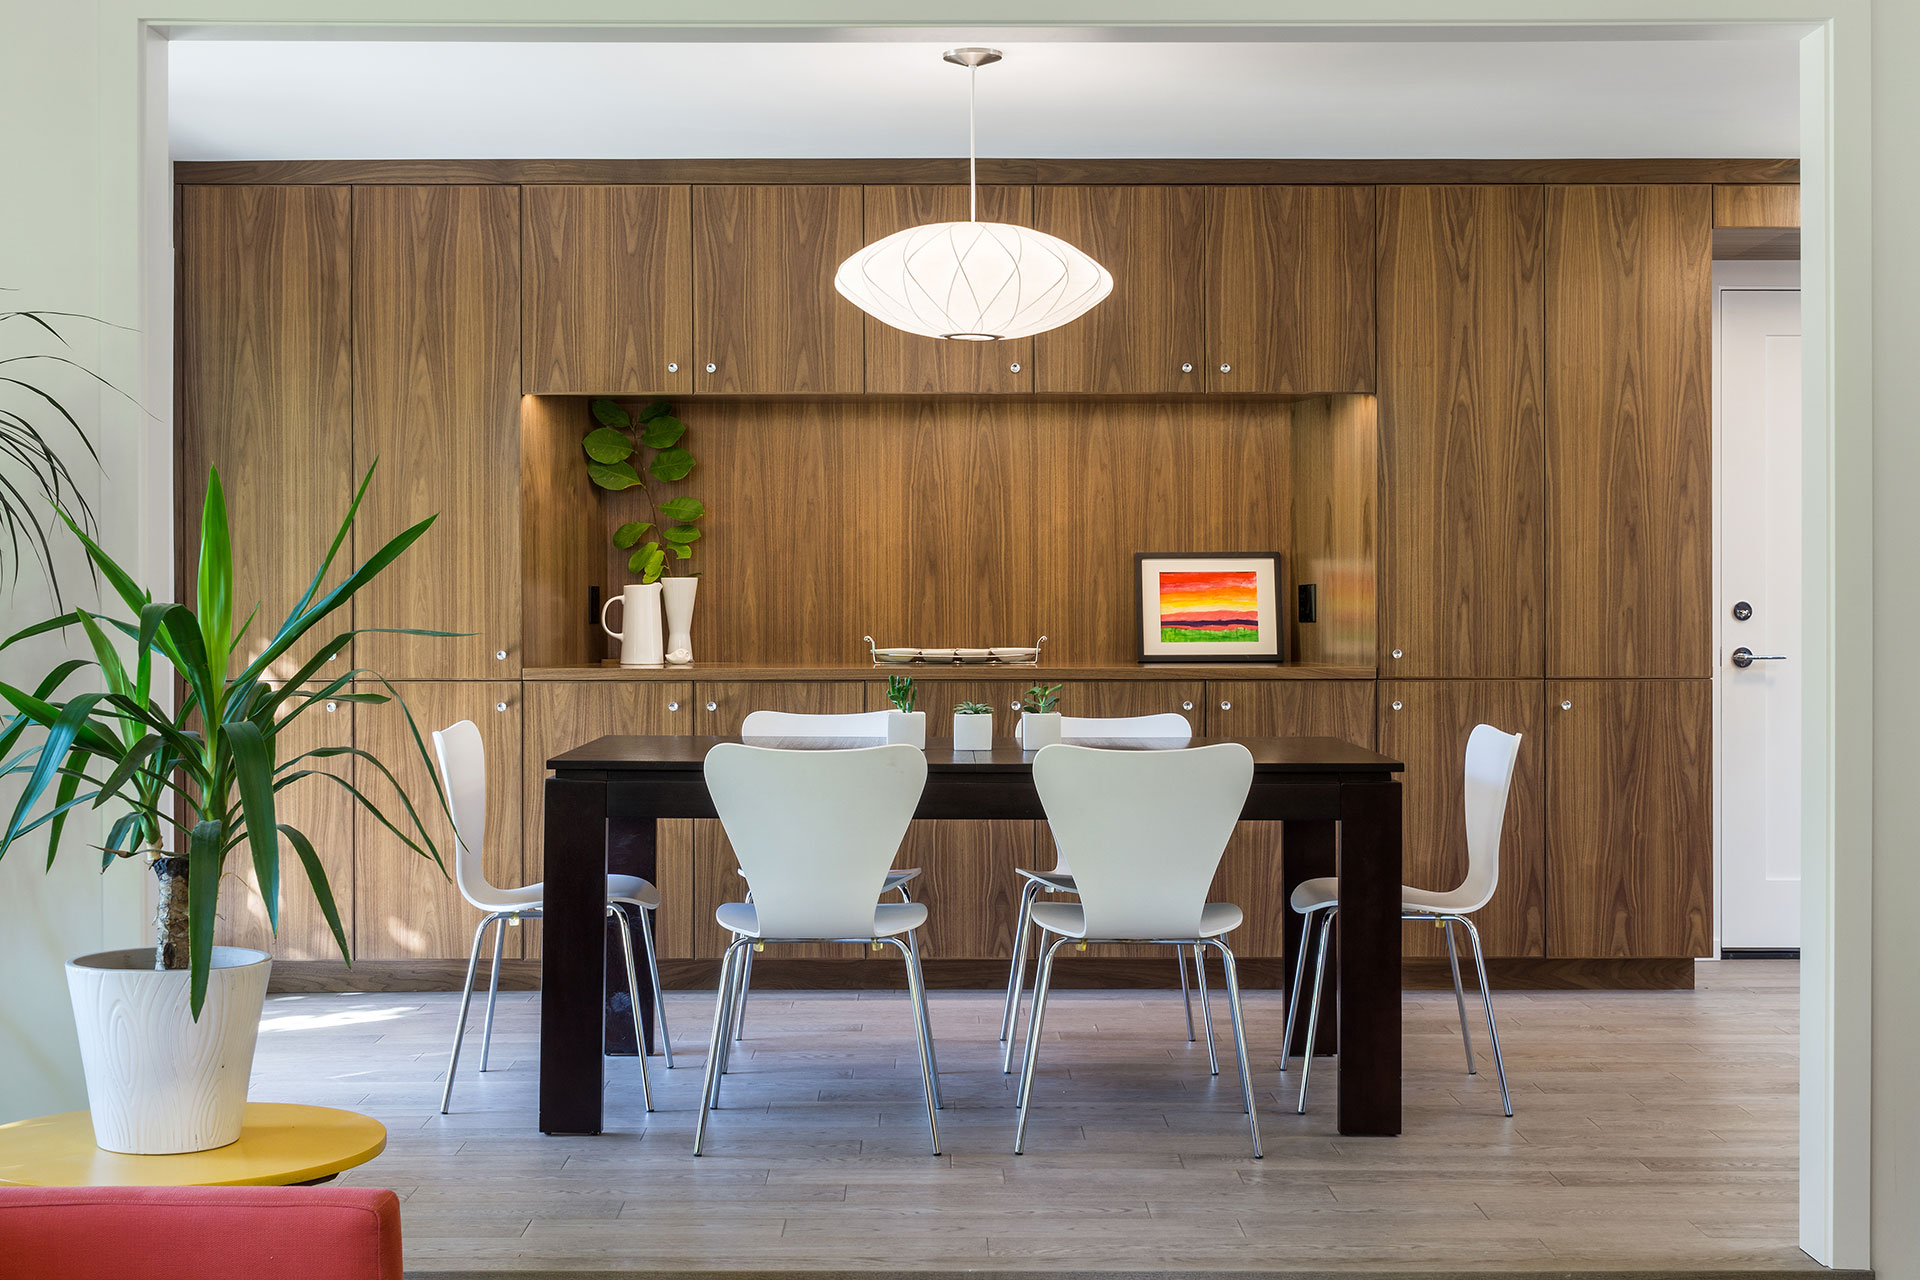 The renovated dining room at the Hawkridge Modern features a built-in buffet crafted of plain-sliced walnut.